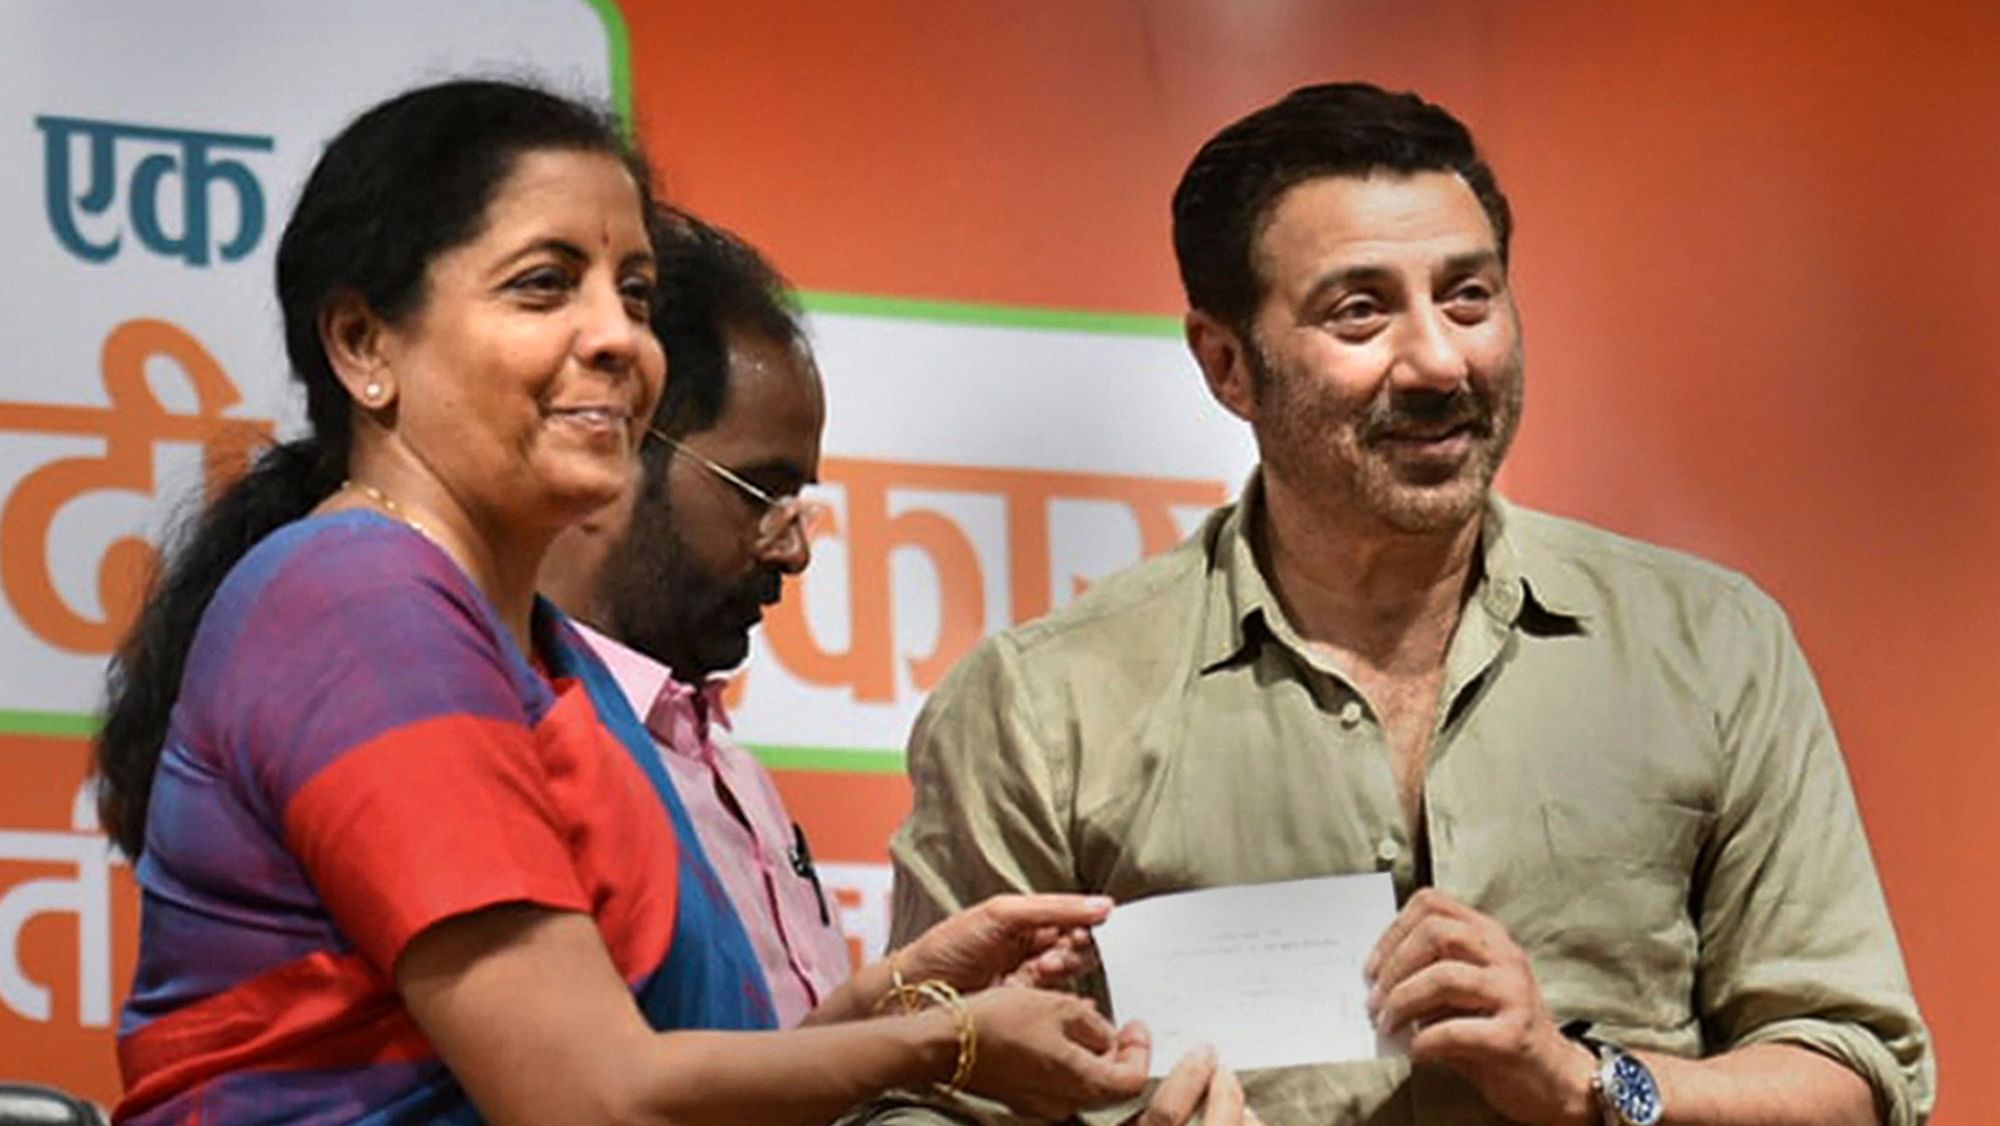 Sunny Deol joined the BJP in the presence of Nirmala Sitharaman and Piyush Goyal.